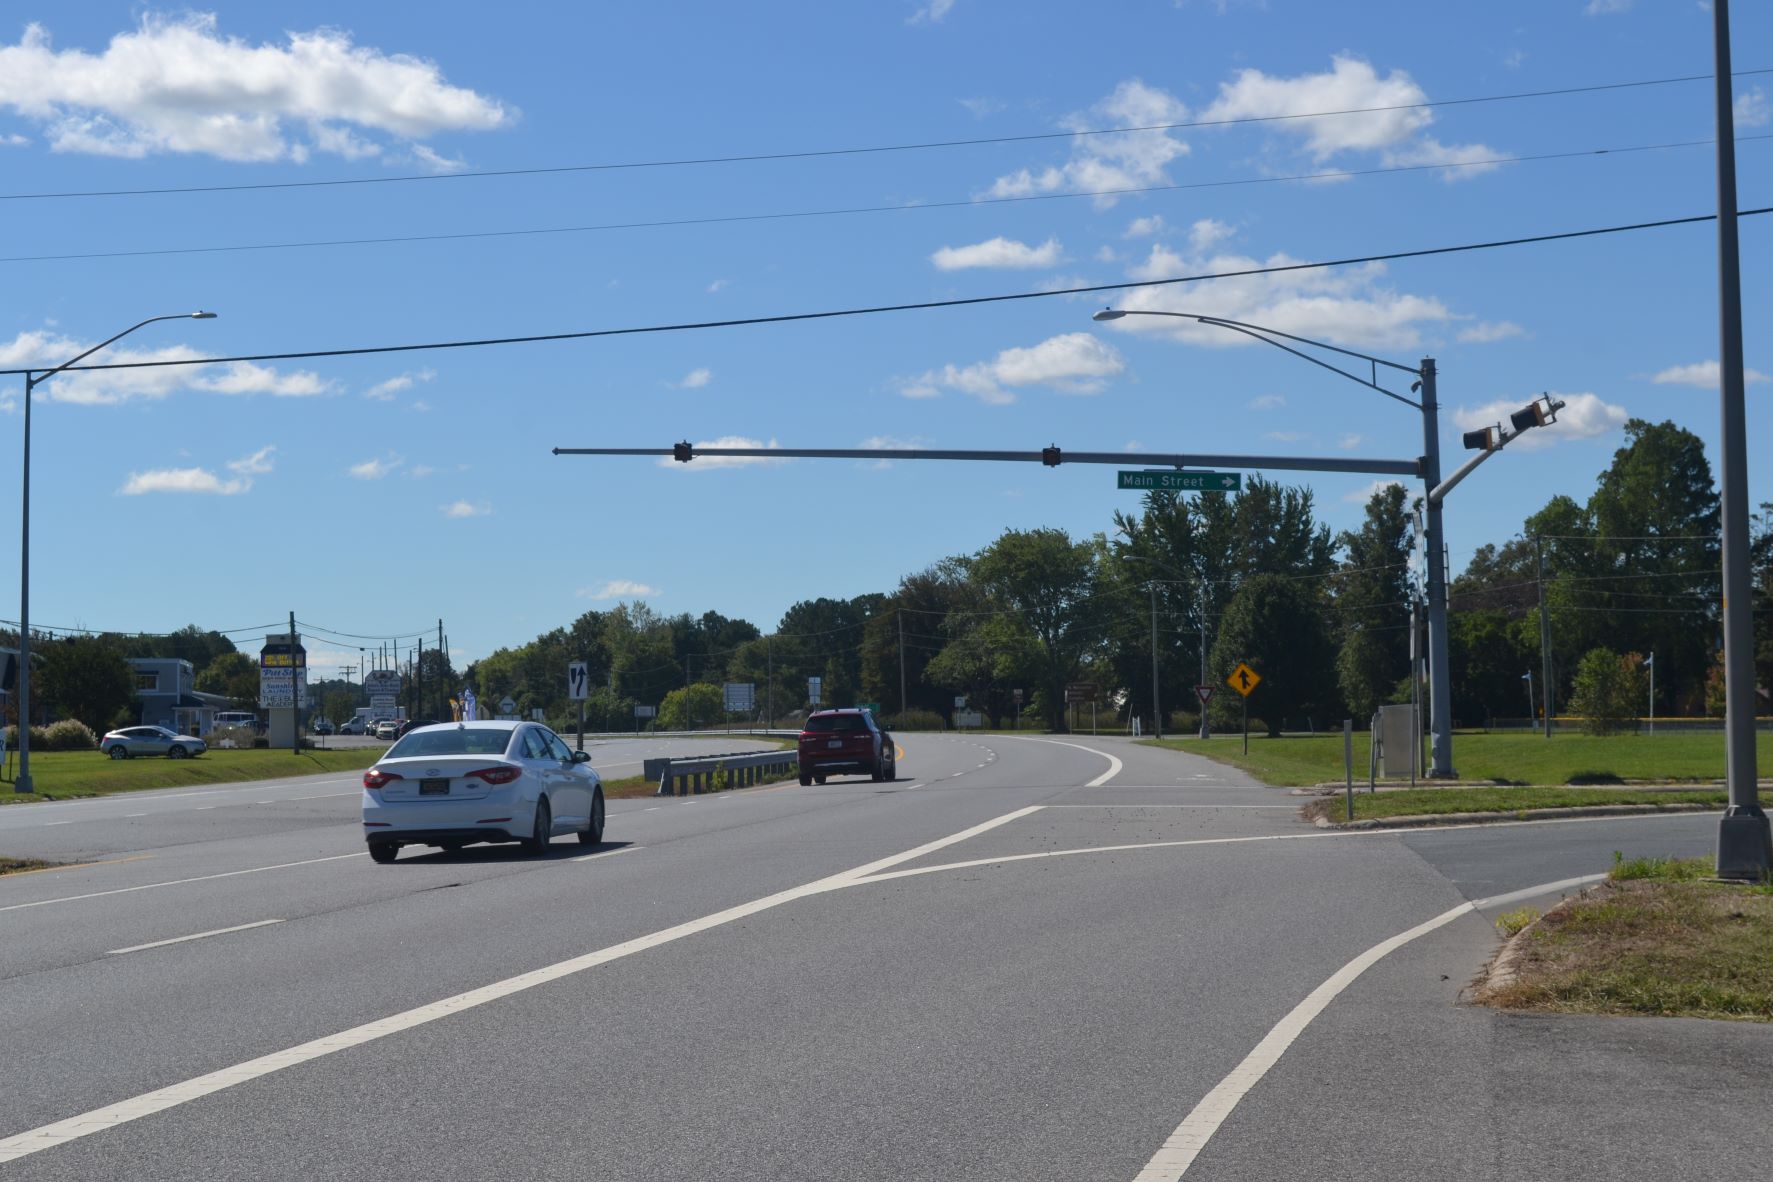 Traffic Signal To Be Installed at Route 113 Intersection In Berlin